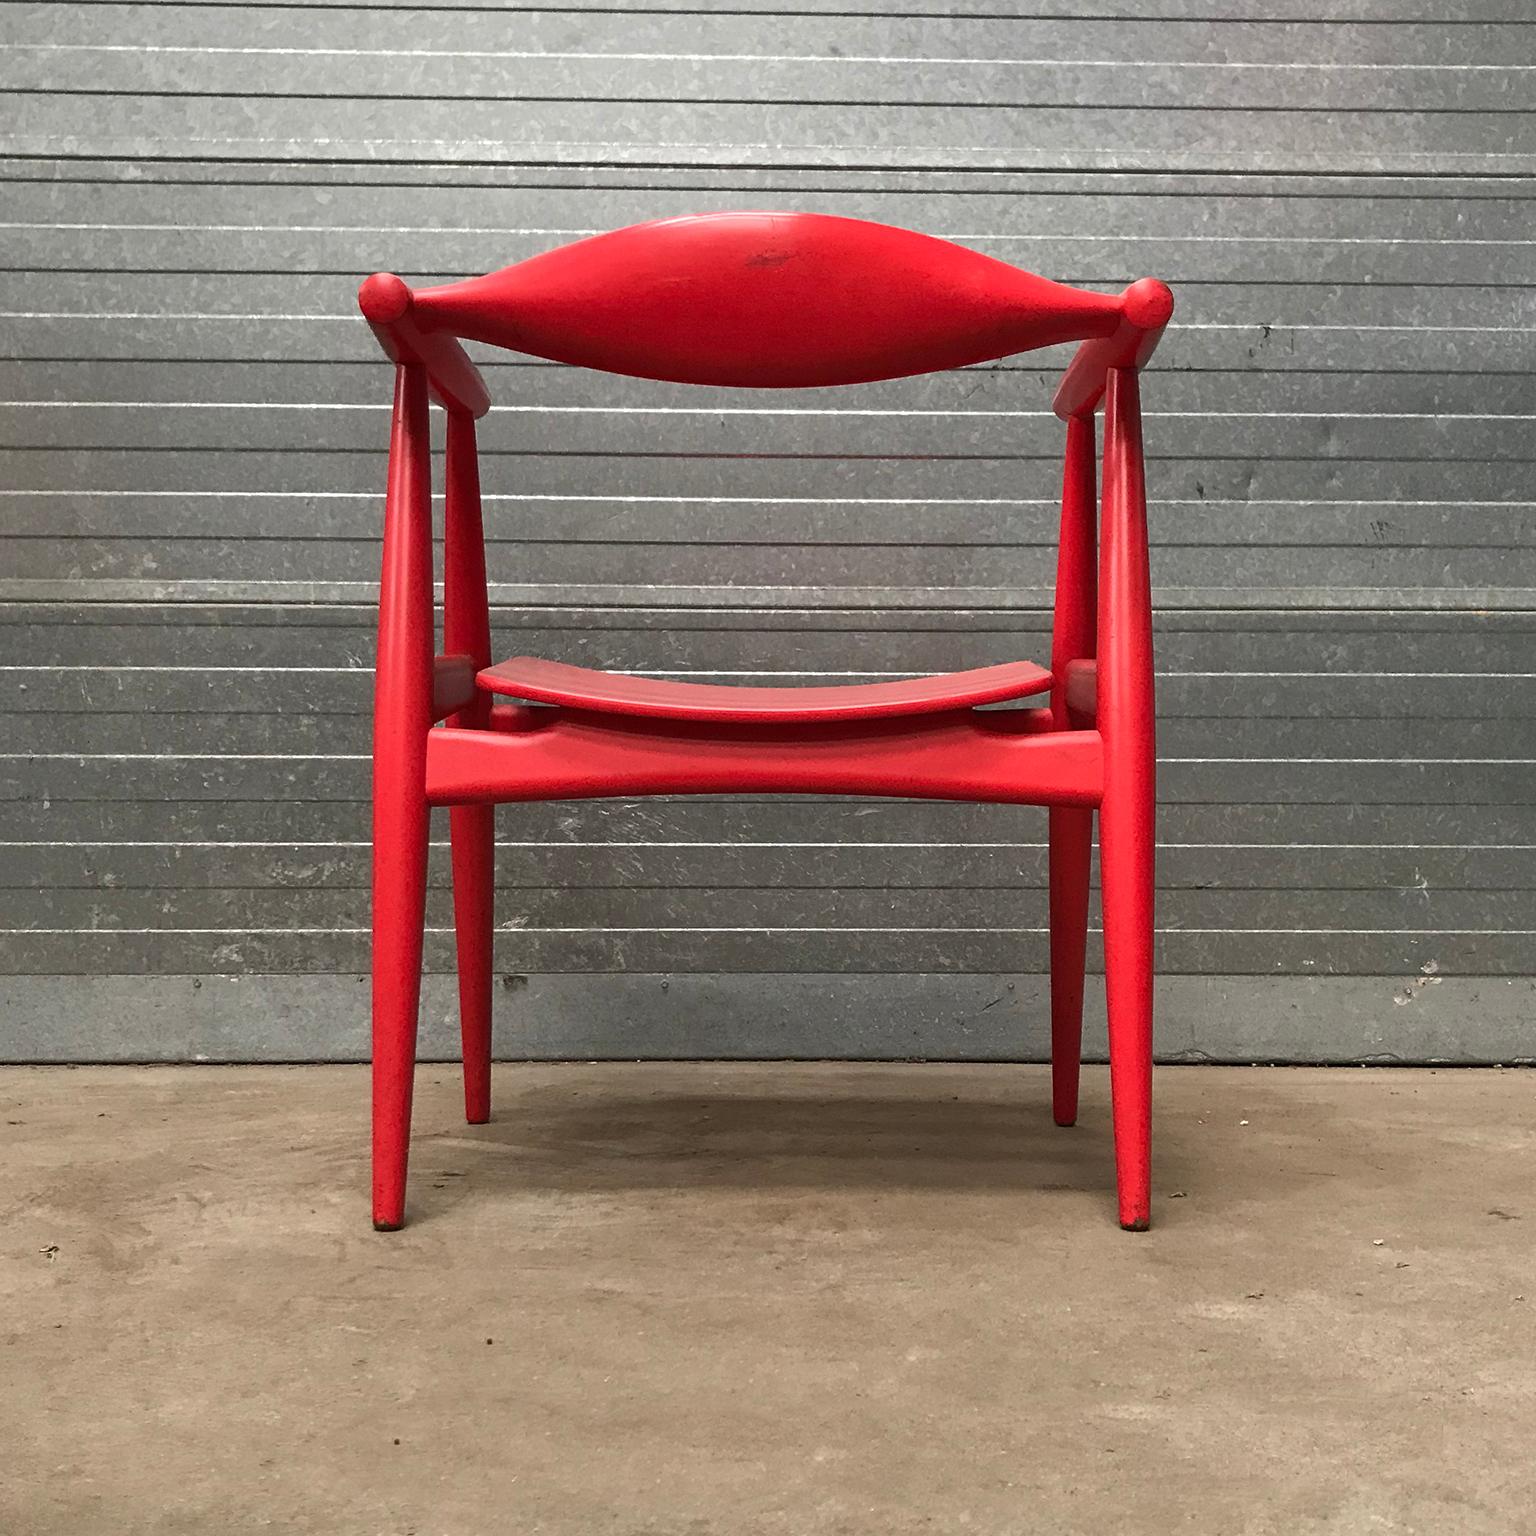 Very Rare Wegner Side Chair in Originally Red Painted Wood, circa 1930 For Sale 3